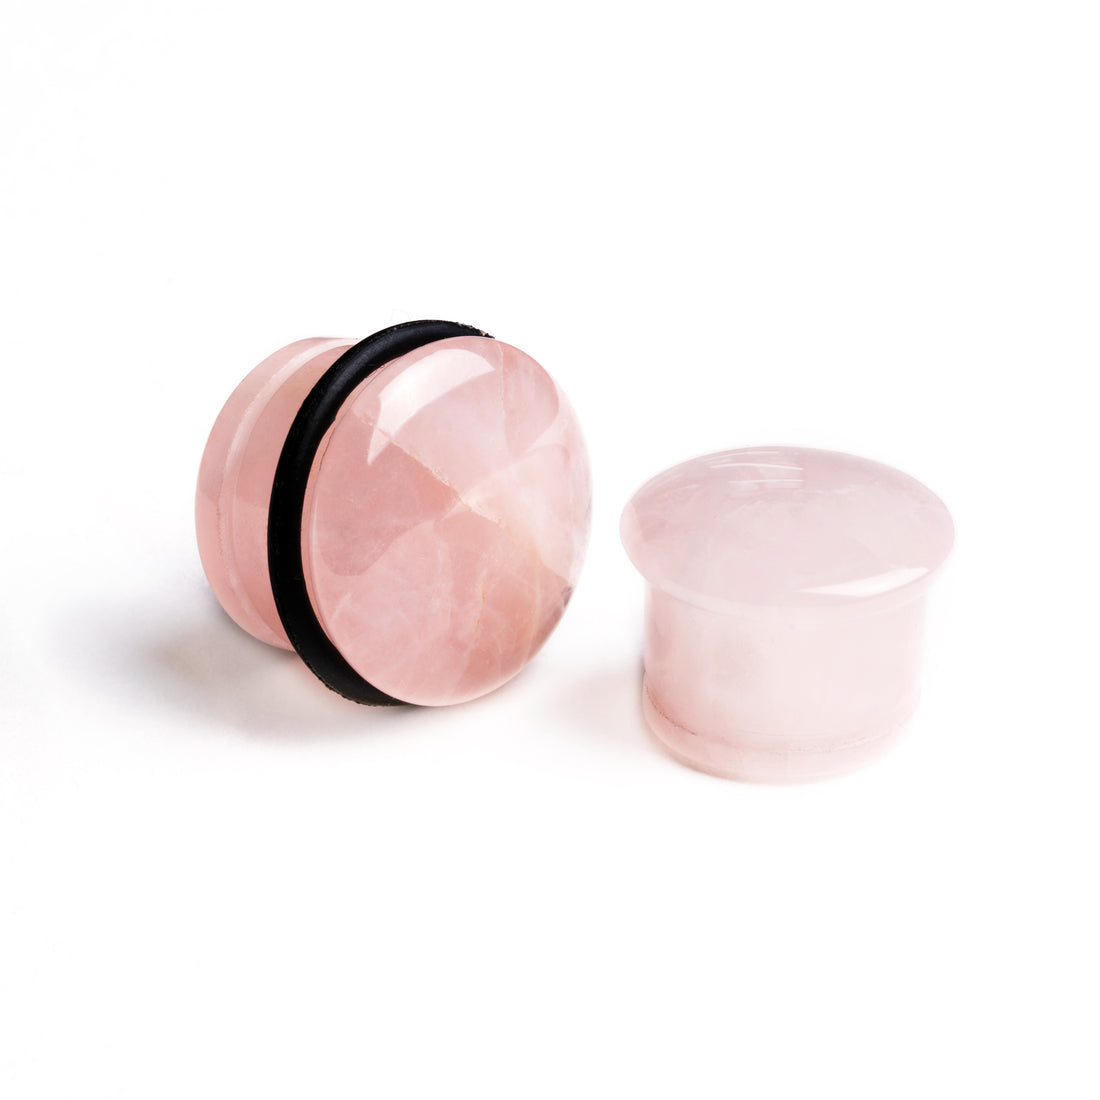 pair of single flare rose quartz stone ear plugs front and side view